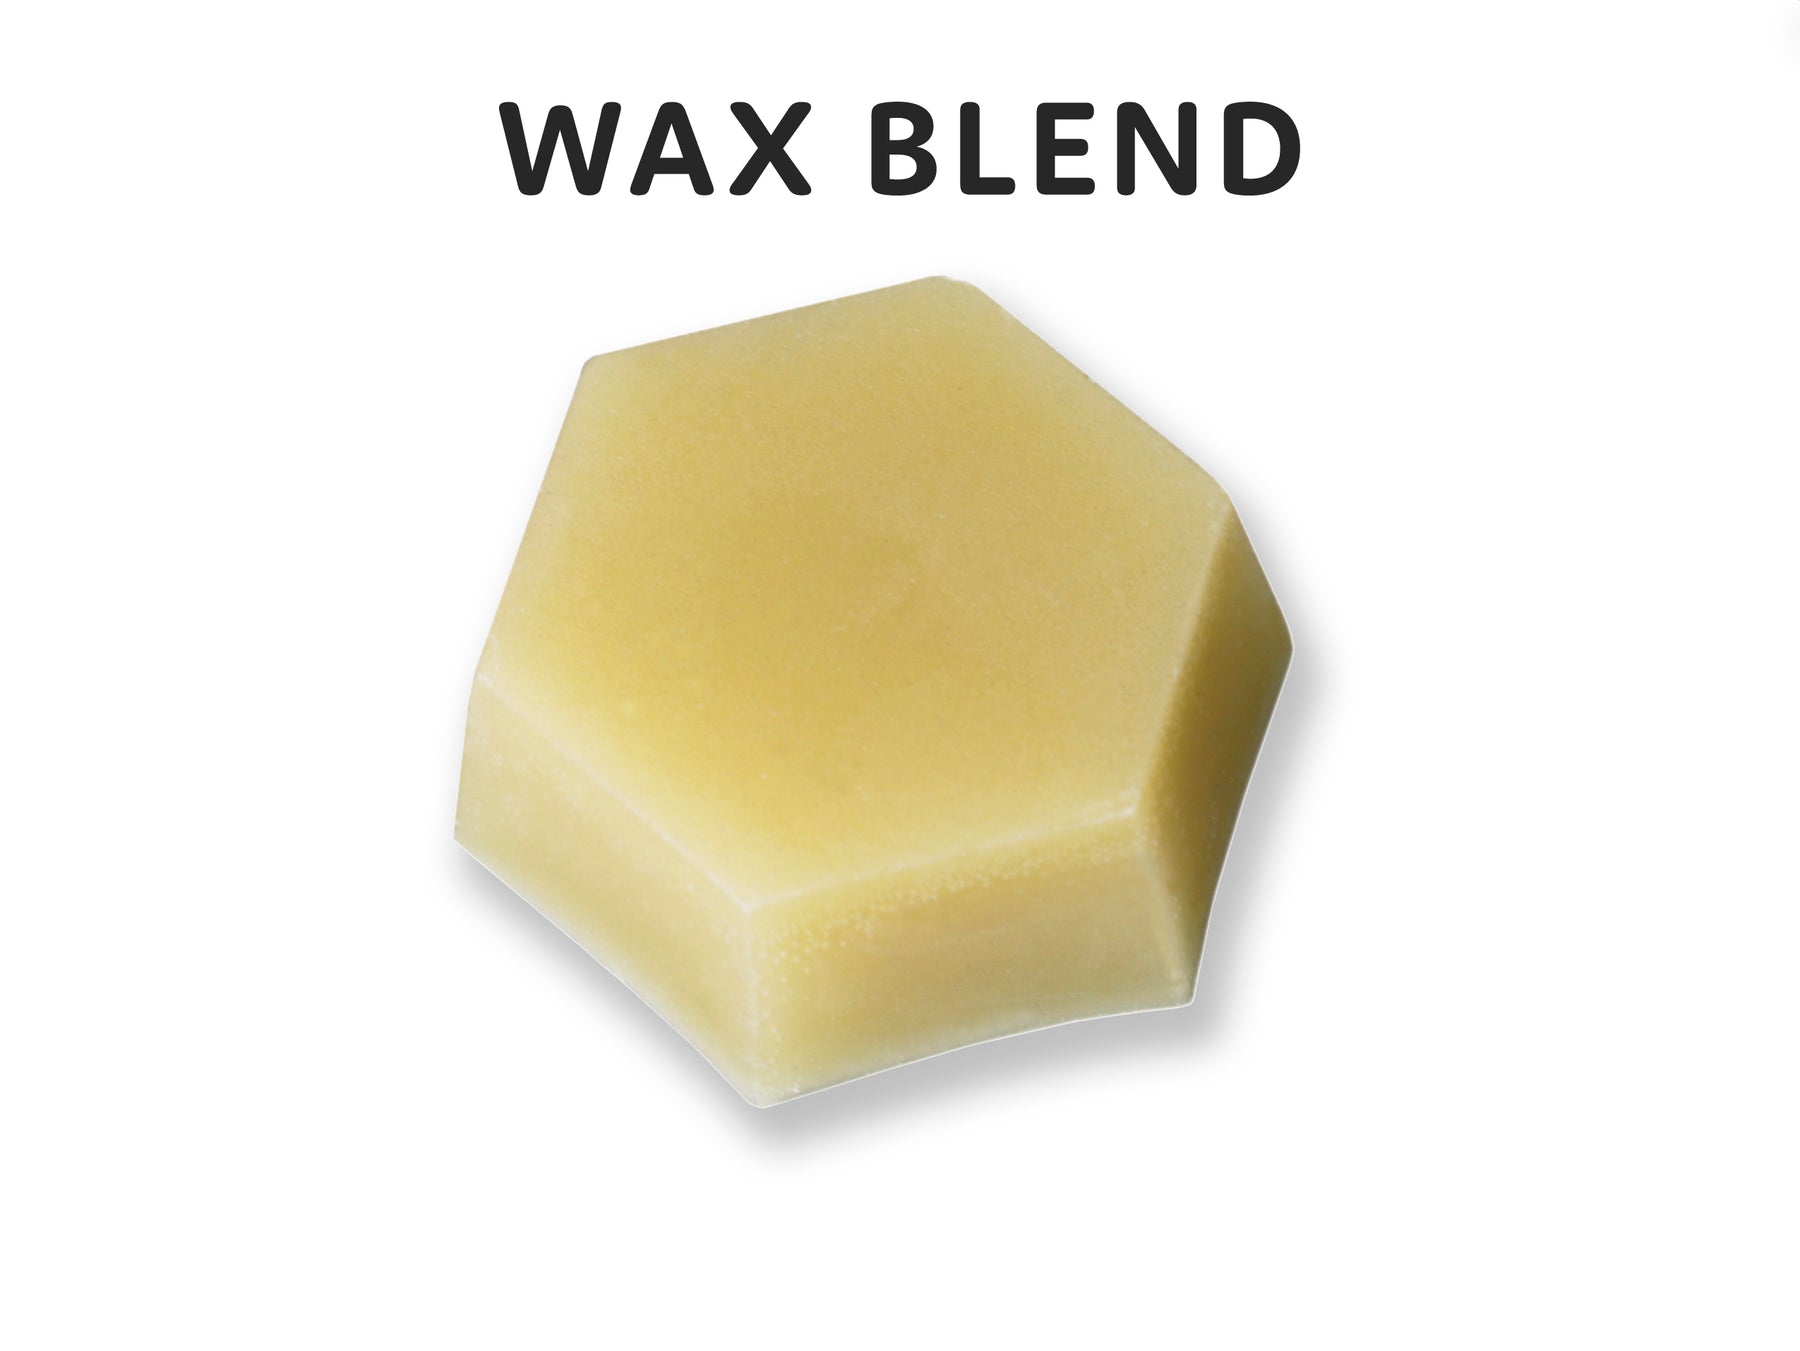 Beeswax wax for leather (54g) with rag maintenance leather wax –  【公式】手作りレザー製品の伊の蔵・レザー